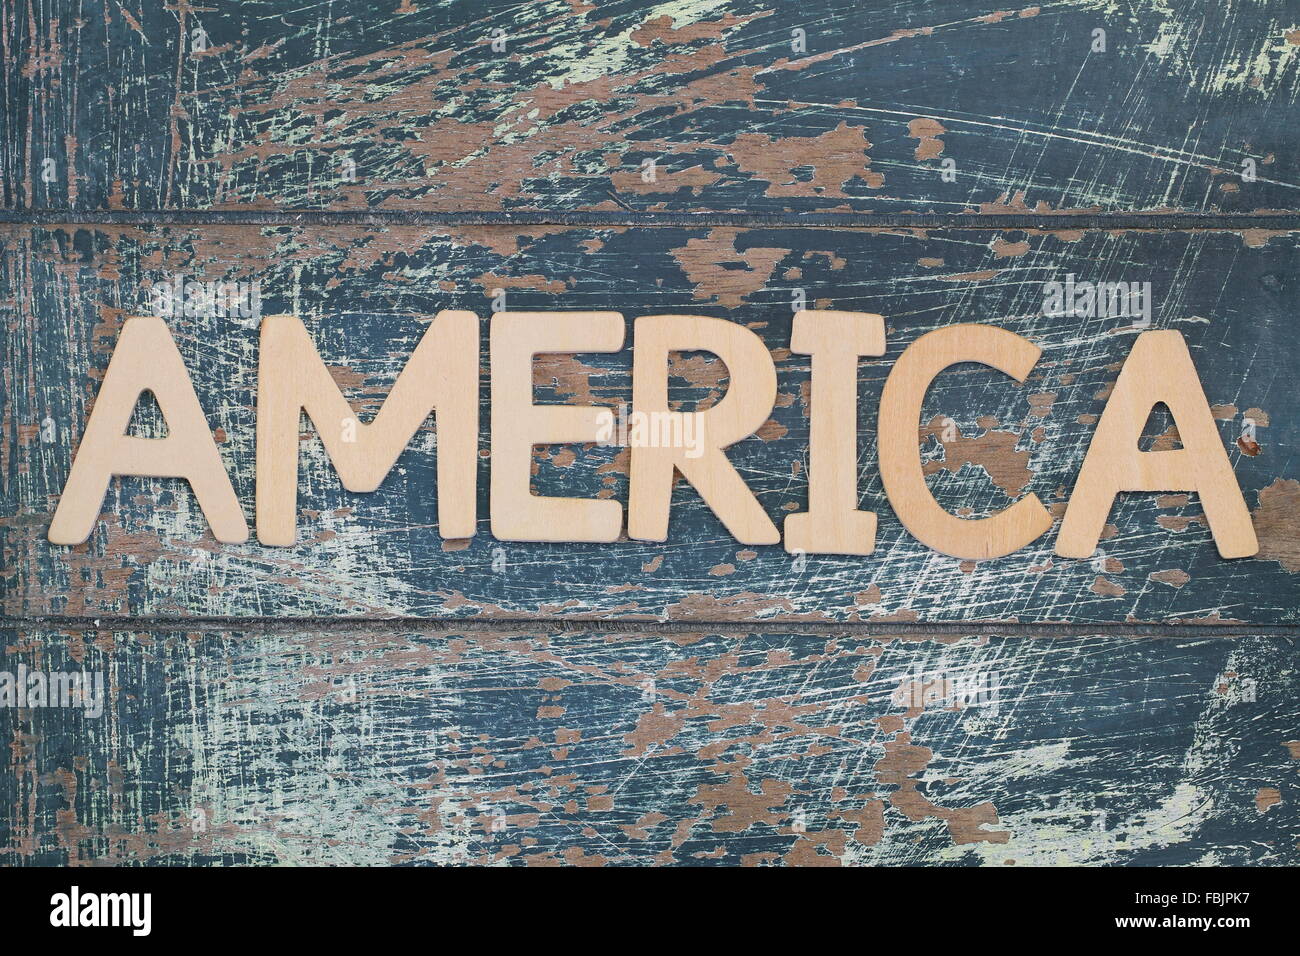 America written with wooden letters on rustic surface Stock Photo